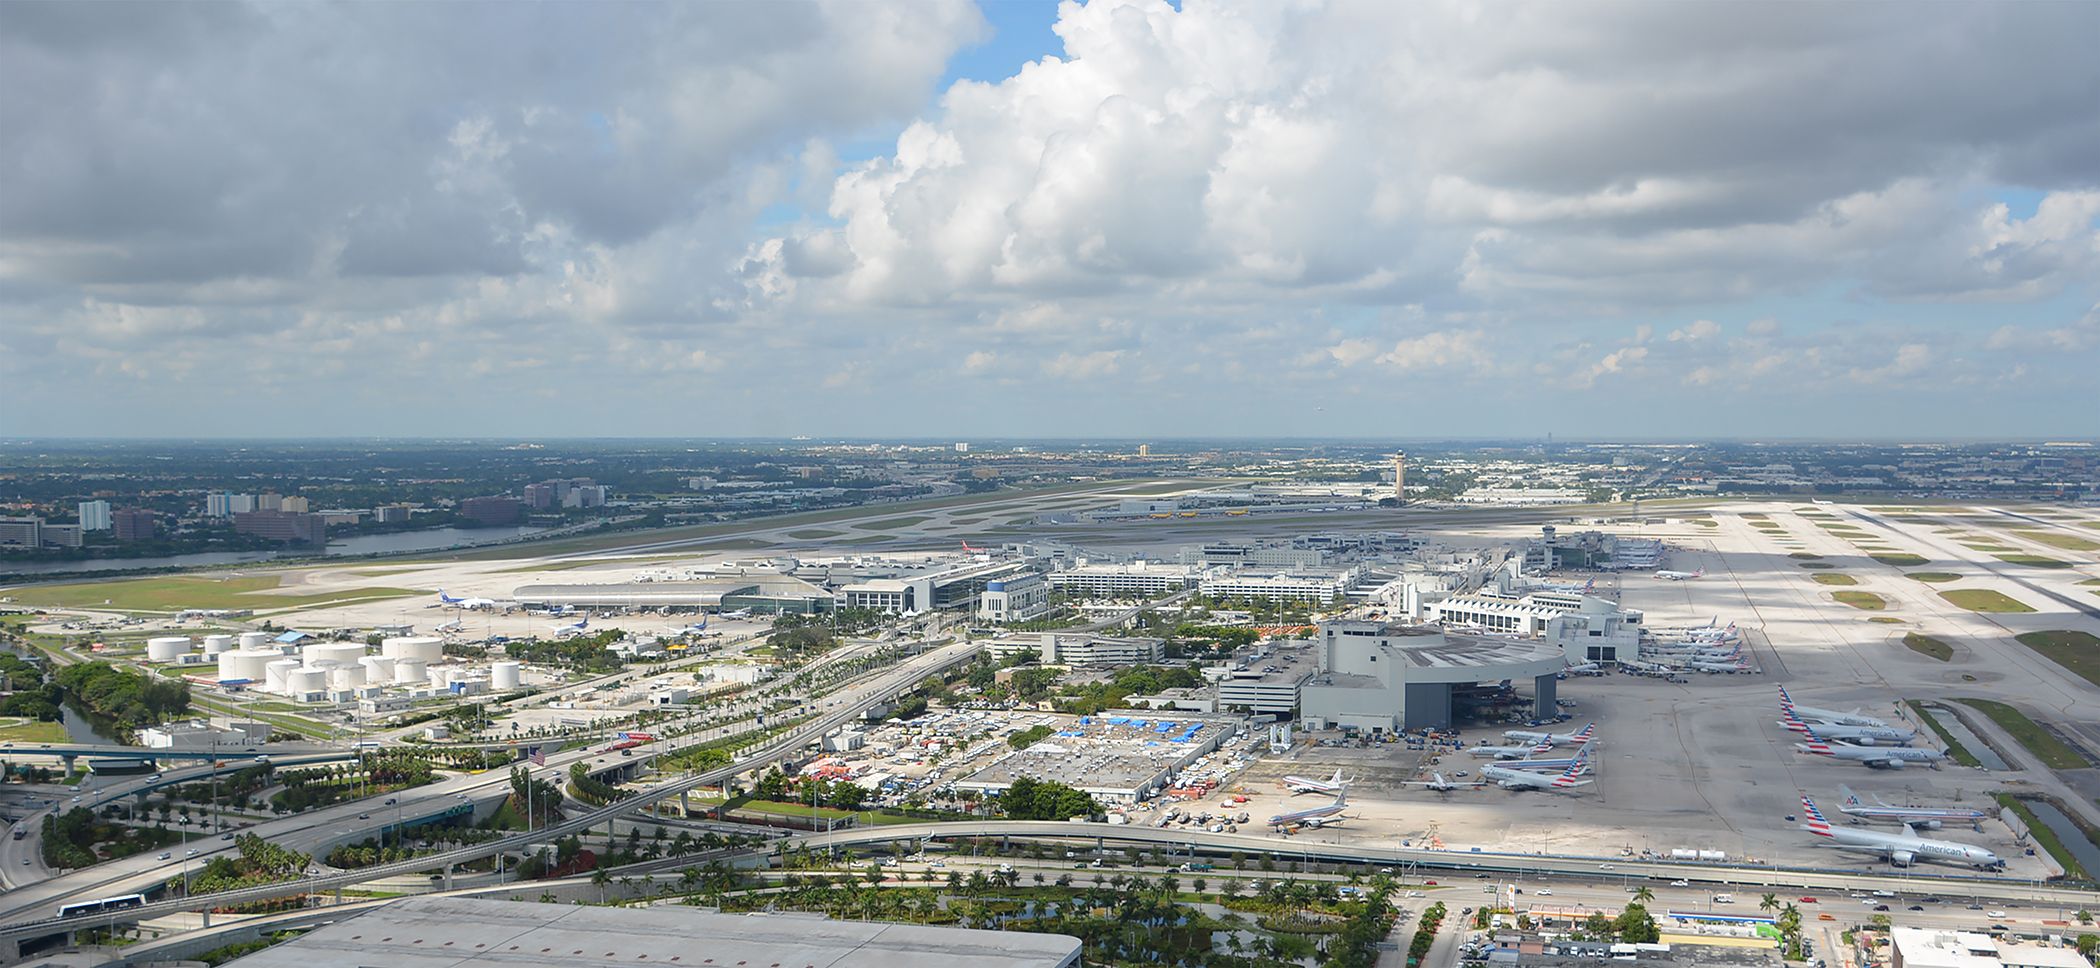 Aerial view of Miami International Airport